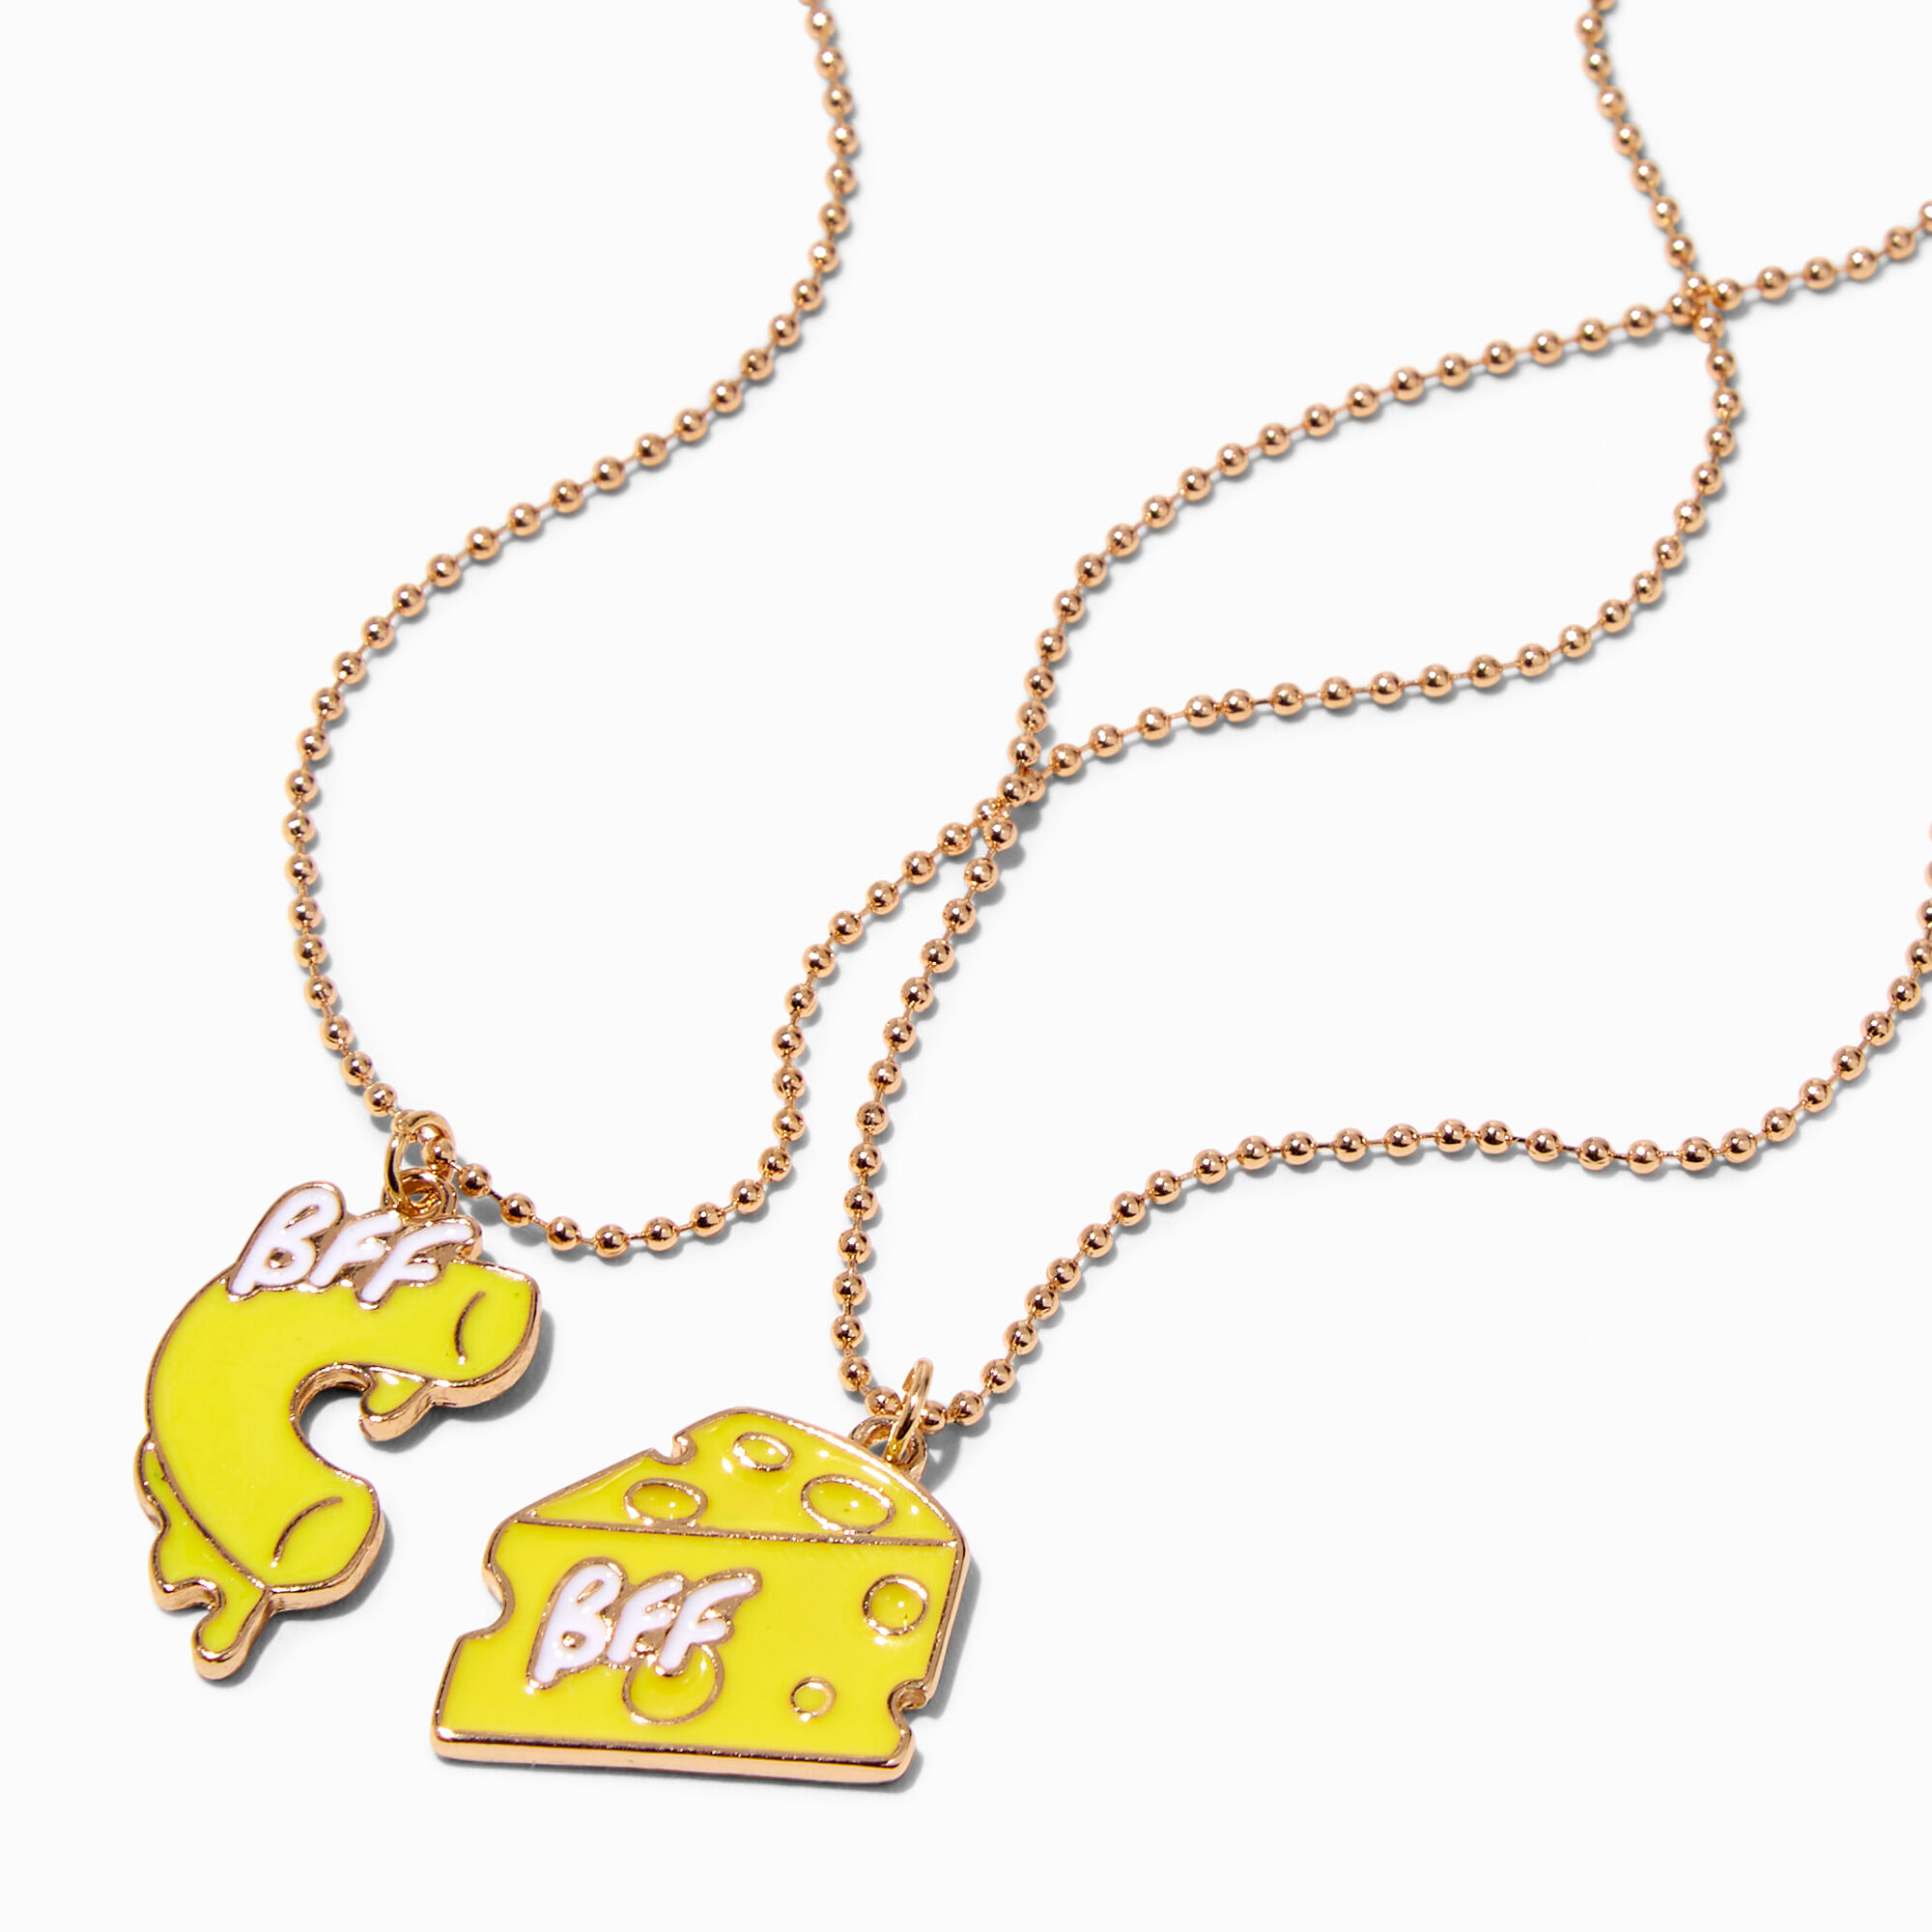 View Claires Best Friends Macaroni Cheese Pendant Necklaces 2 Pack Gold information